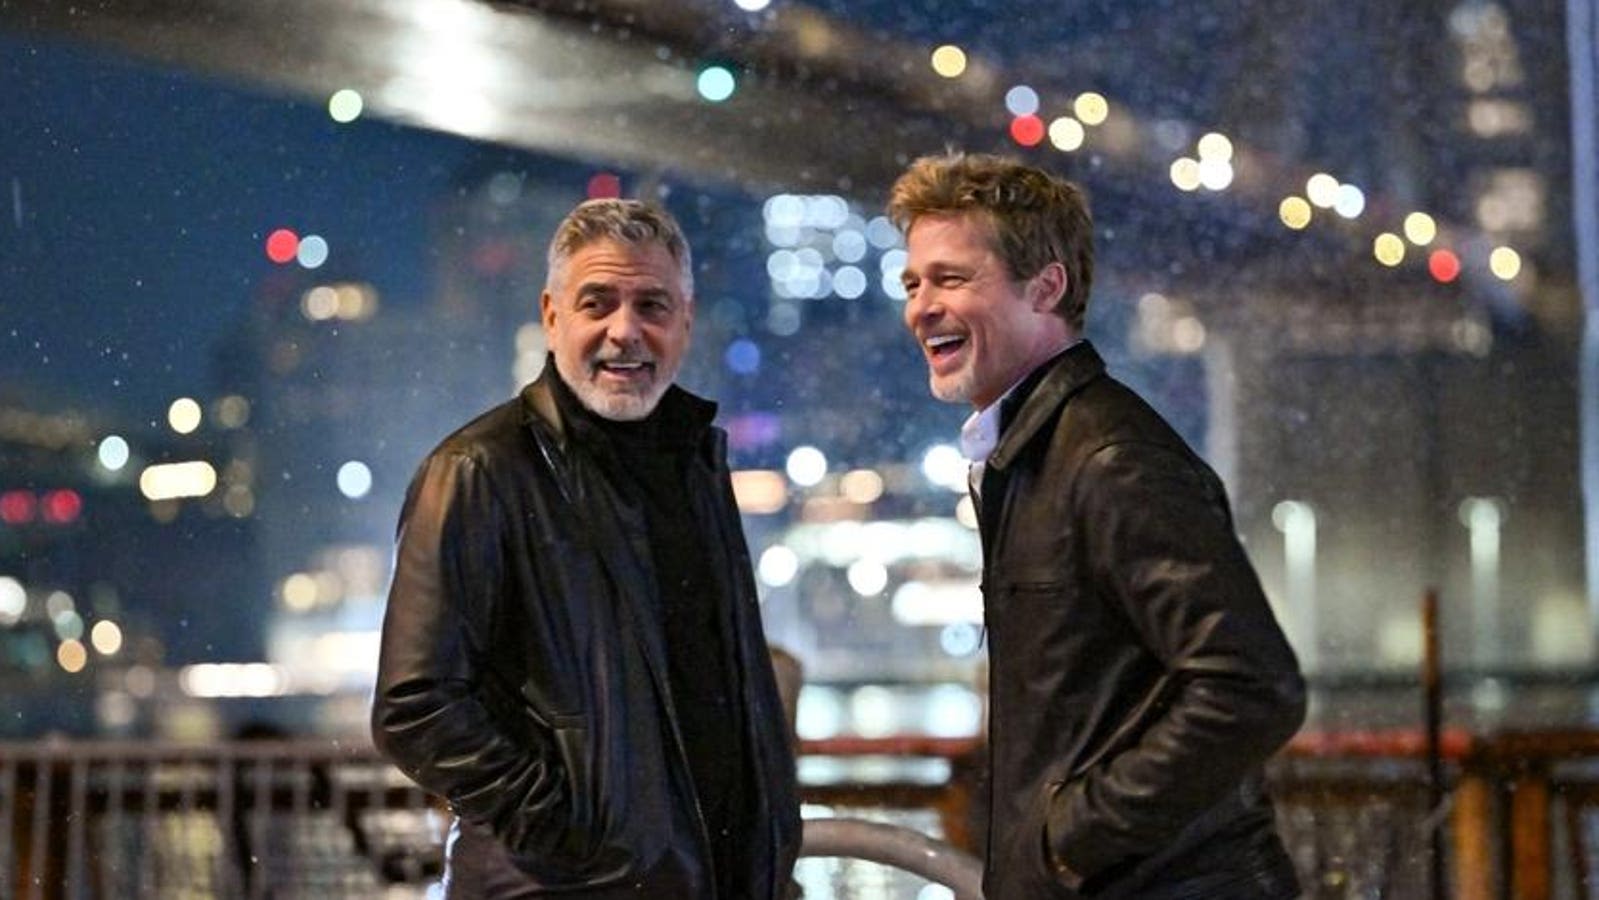 Brad Pitt And George Clooney’s Trailer Drops For ‘Wolfs’—The Duo’s 7th Film. Here’s How The Others Performed.